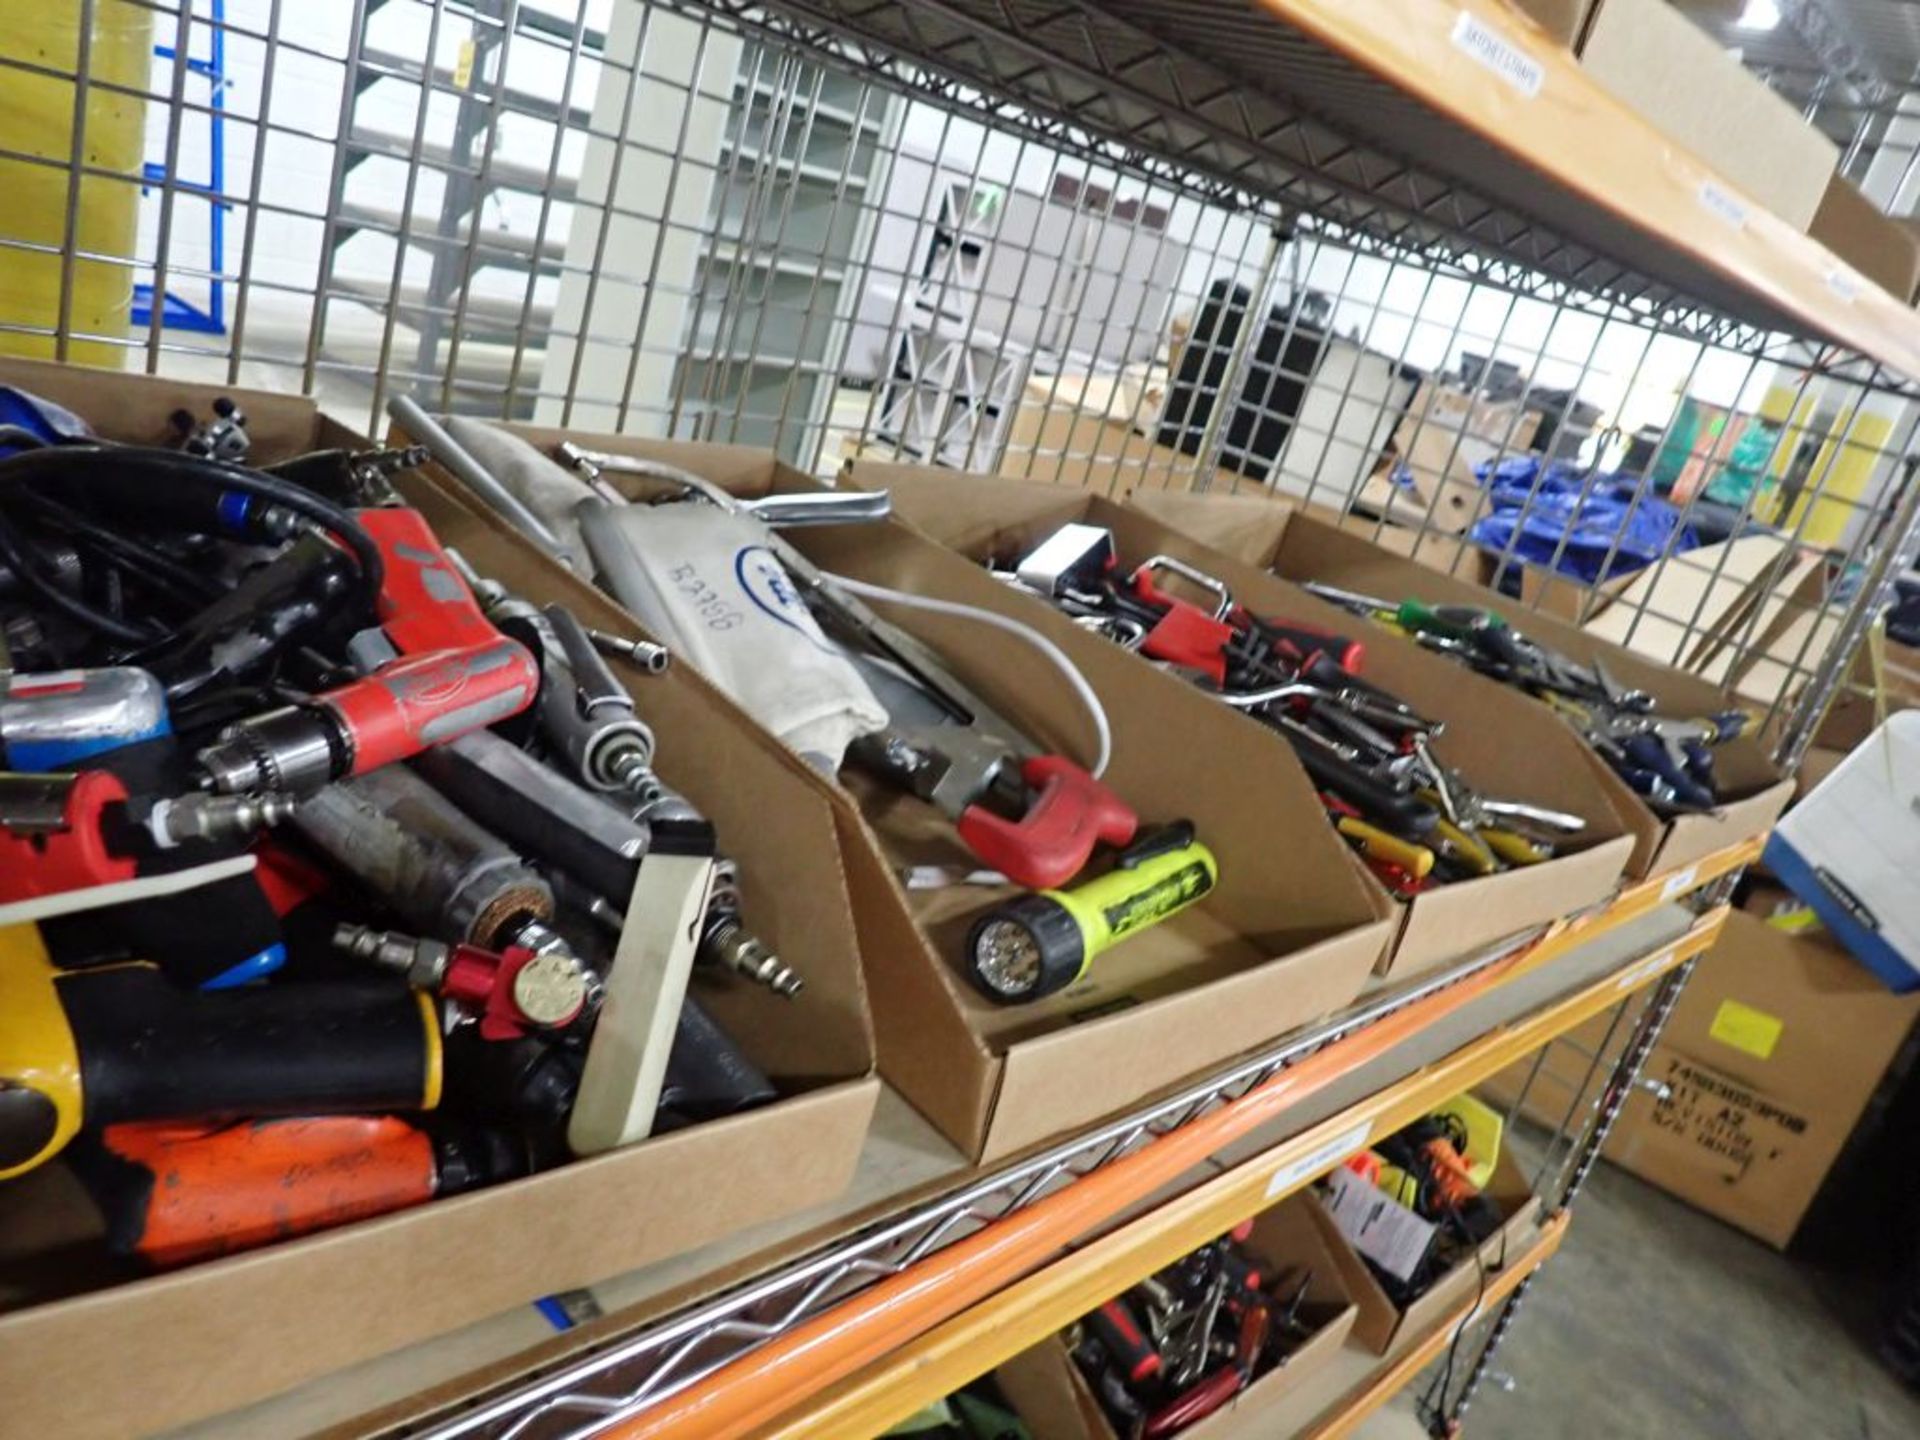 Lot of Assorted Tools | Tag: 241626 | Limited Forklift Assistance Available - $10.00 Lot Loading